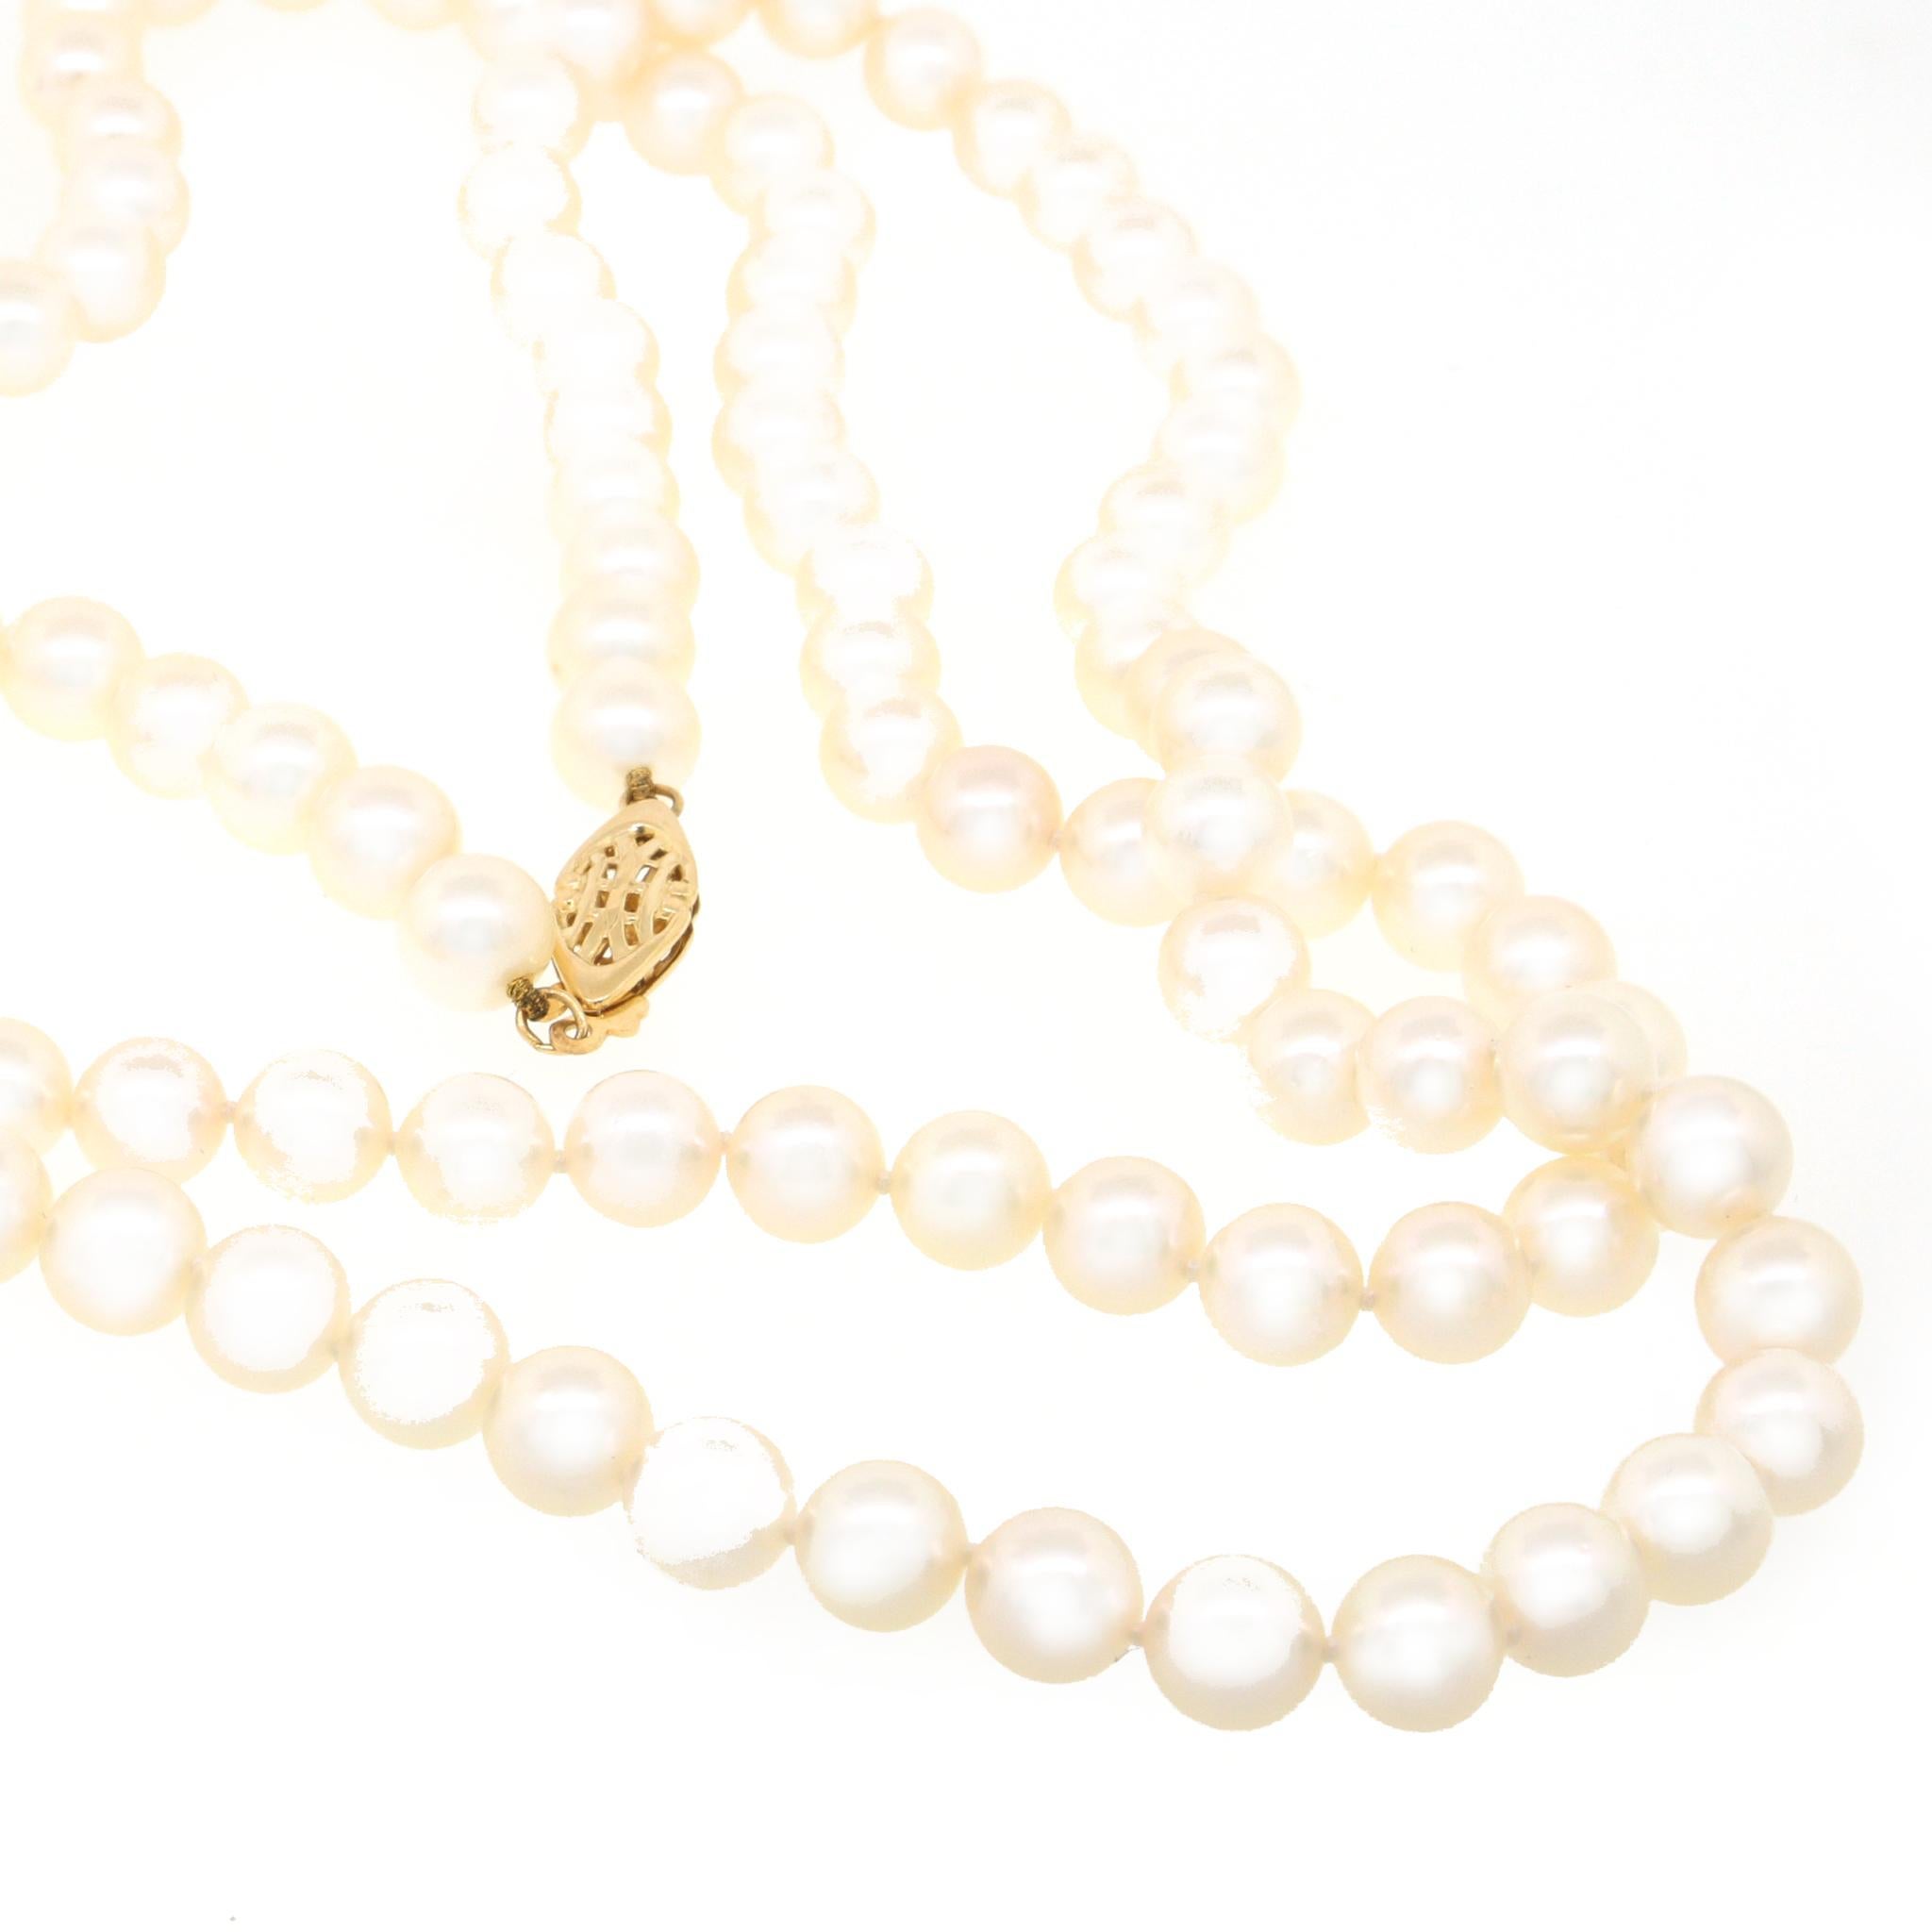 long strand of pearls